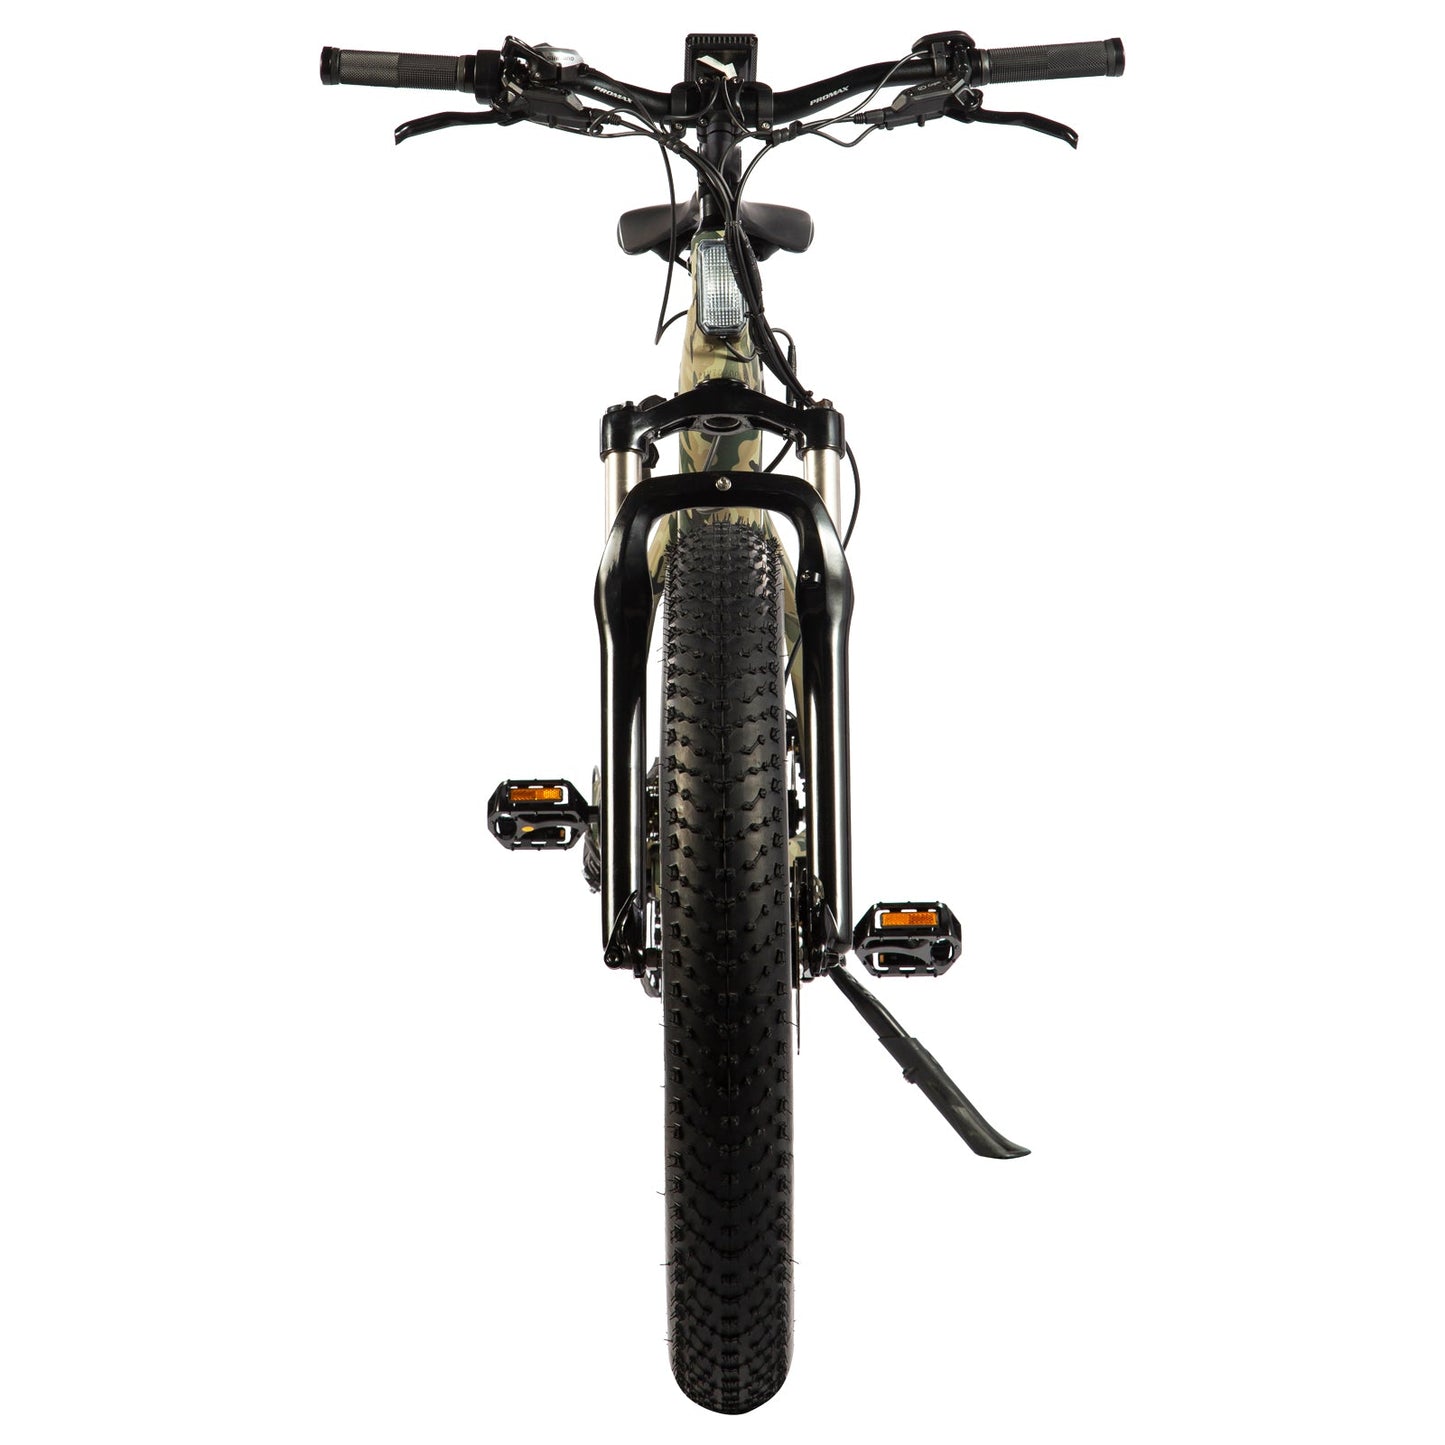 Vtuvia SN100 All Terrain  Fat Tire Electric Hunting Bike - 750W Motor with Front Suspension for Comfort